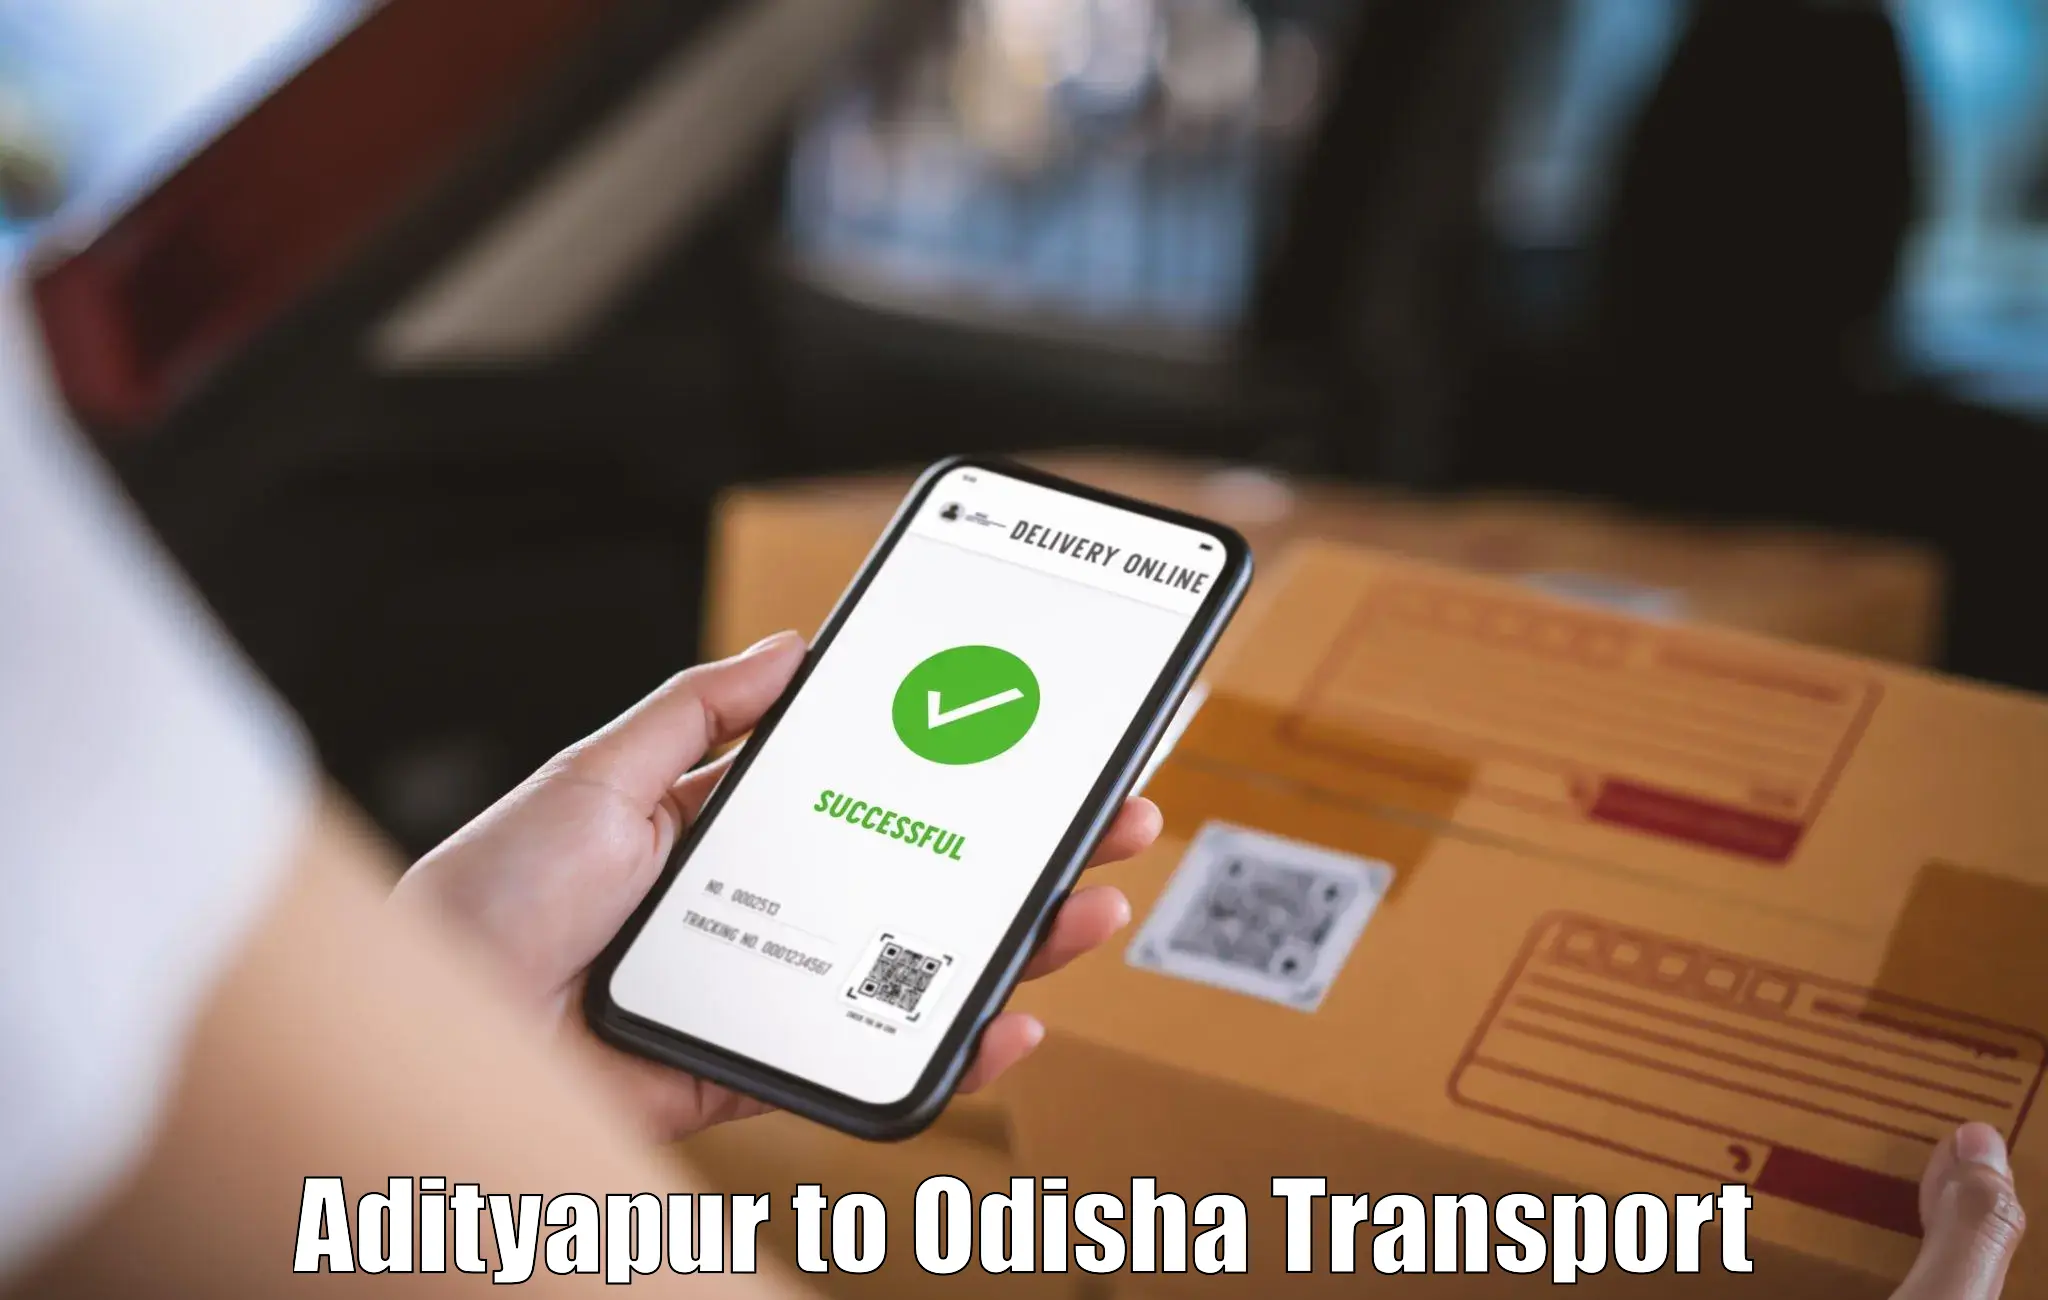 Commercial transport service Adityapur to Khariar